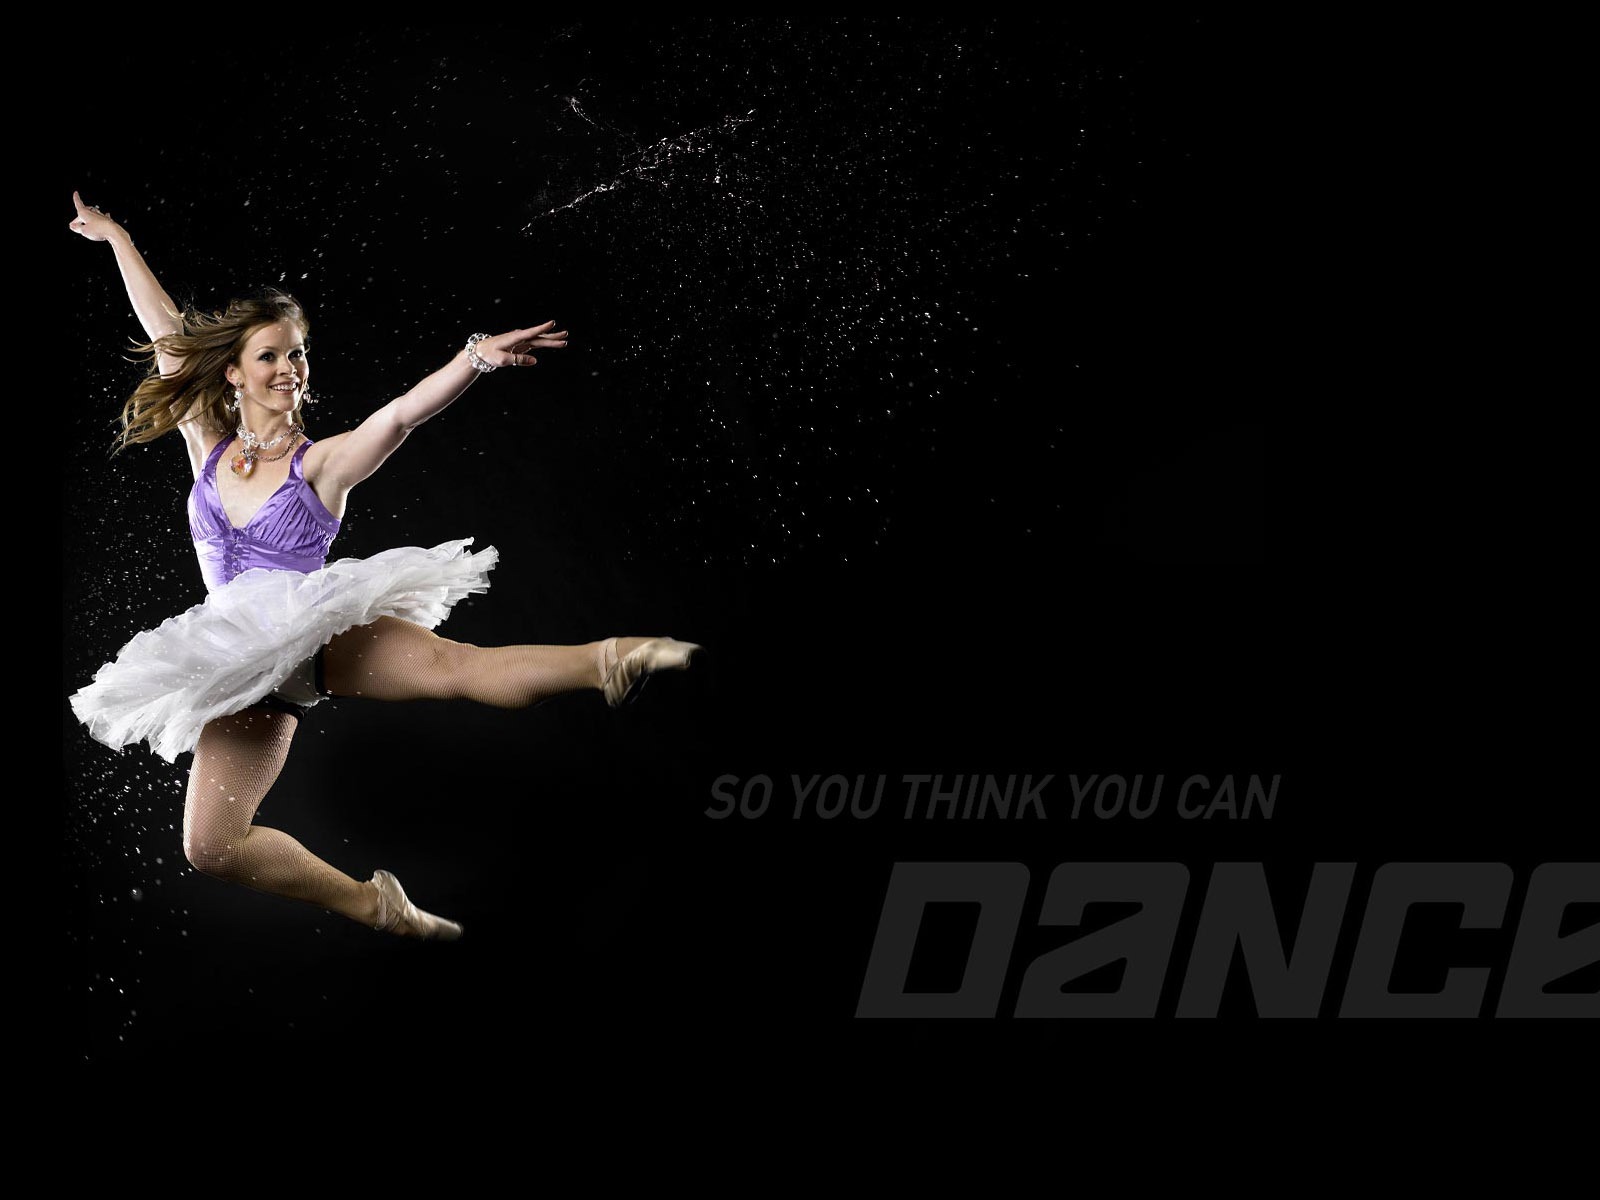 So You Think You Can Dance Wallpaper (1) #15 - 1600x1200